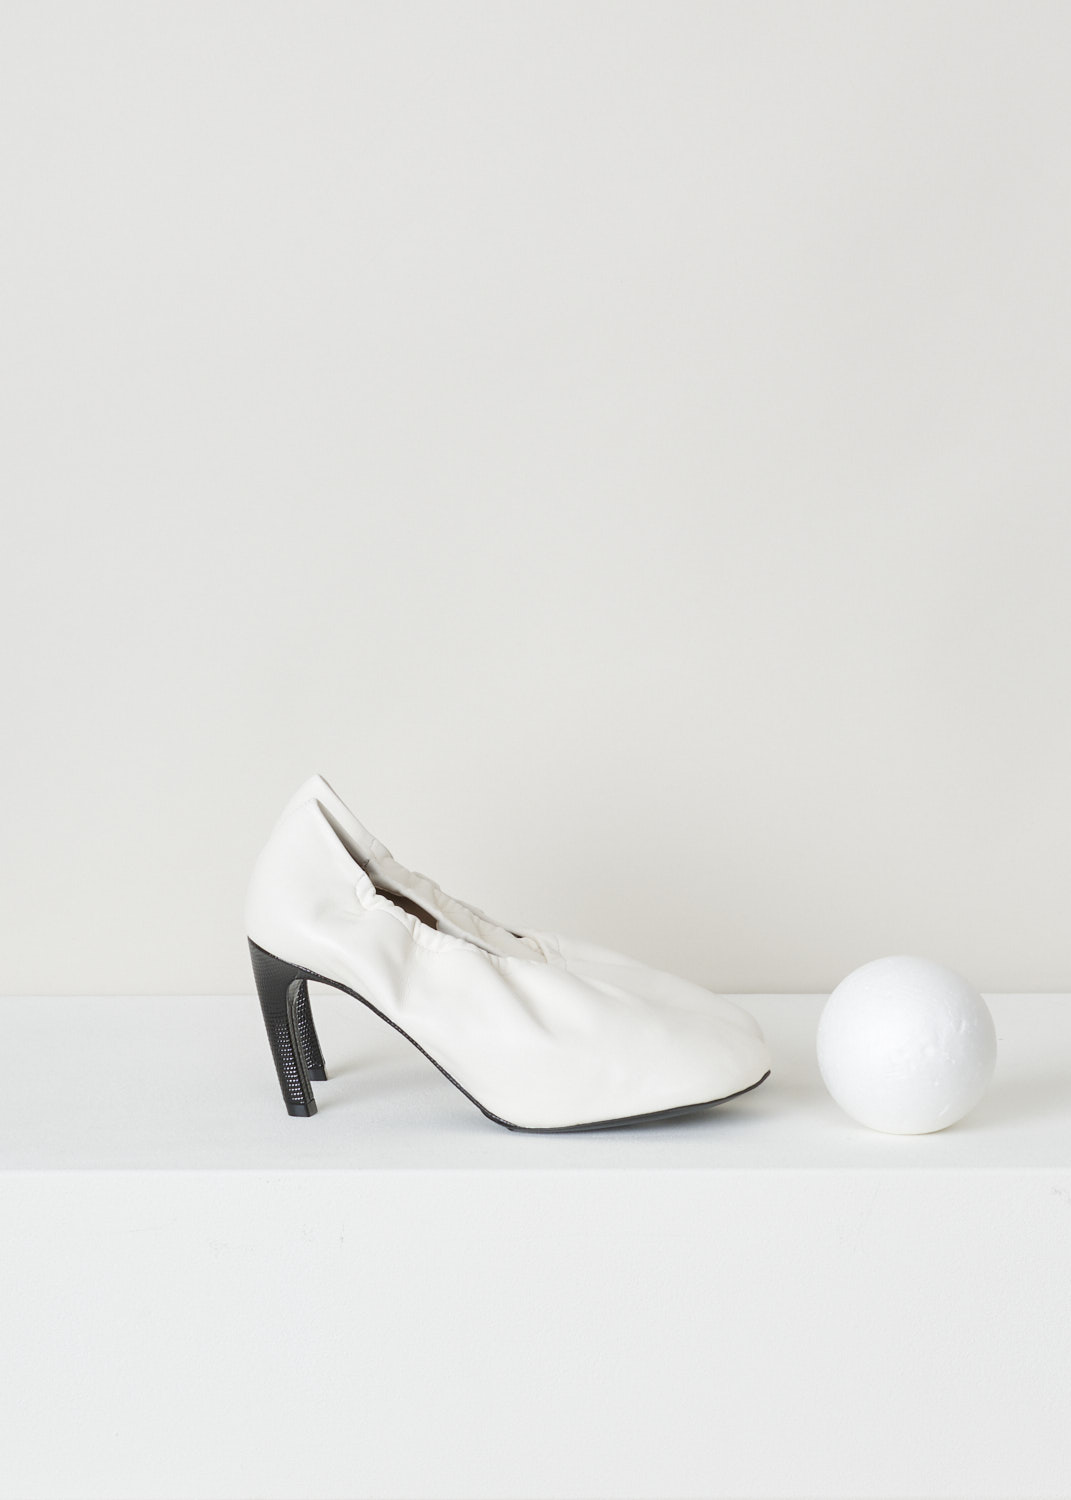 Dries van Noten, Off-white pump with an elastic fold-over vamp, WS211_138_H80_QU155_white001, side, white black, Off-white pumps made entirely out of soft and smooth calfskin. A quirky feature on this model is the elastic topline which folds over the toe vamp, ensuring a unique design feature. The toe vamp comes in a square format. Another lovely feature on this model is the heel which is cover in black embossed leather. 

Heel height: 7.5 cm / 2.95 inch.